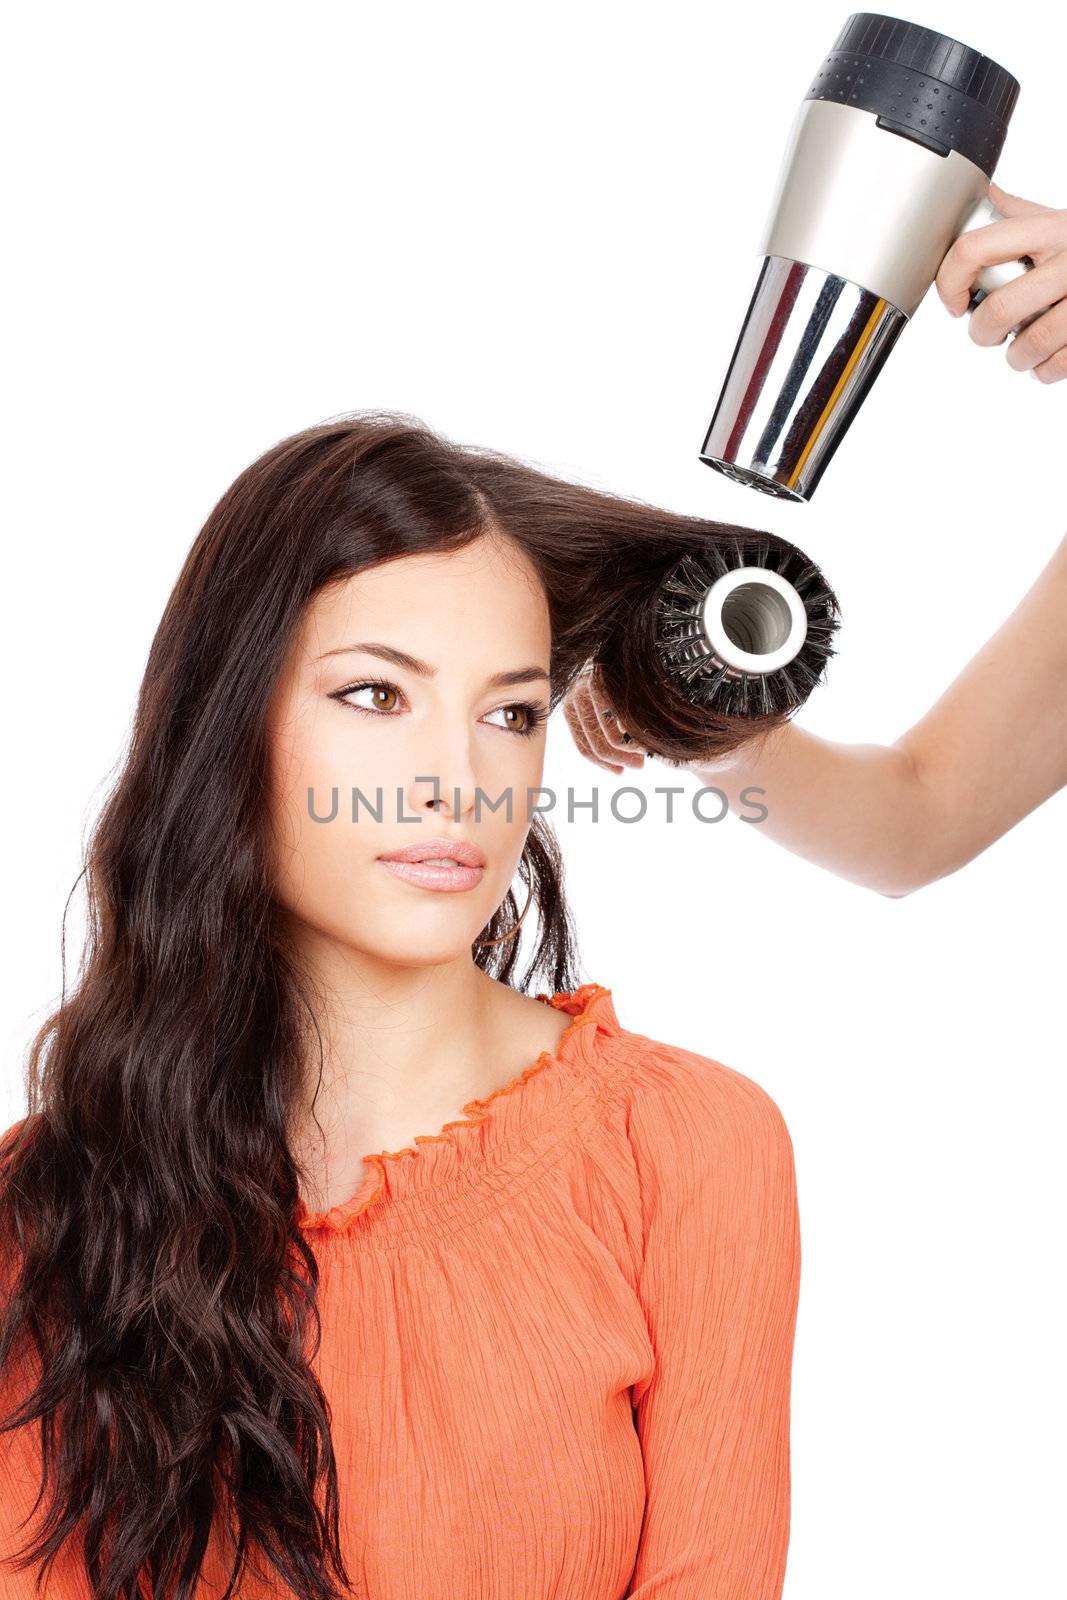 hairdresser combing and dry the hair of a woman, isolated on white background